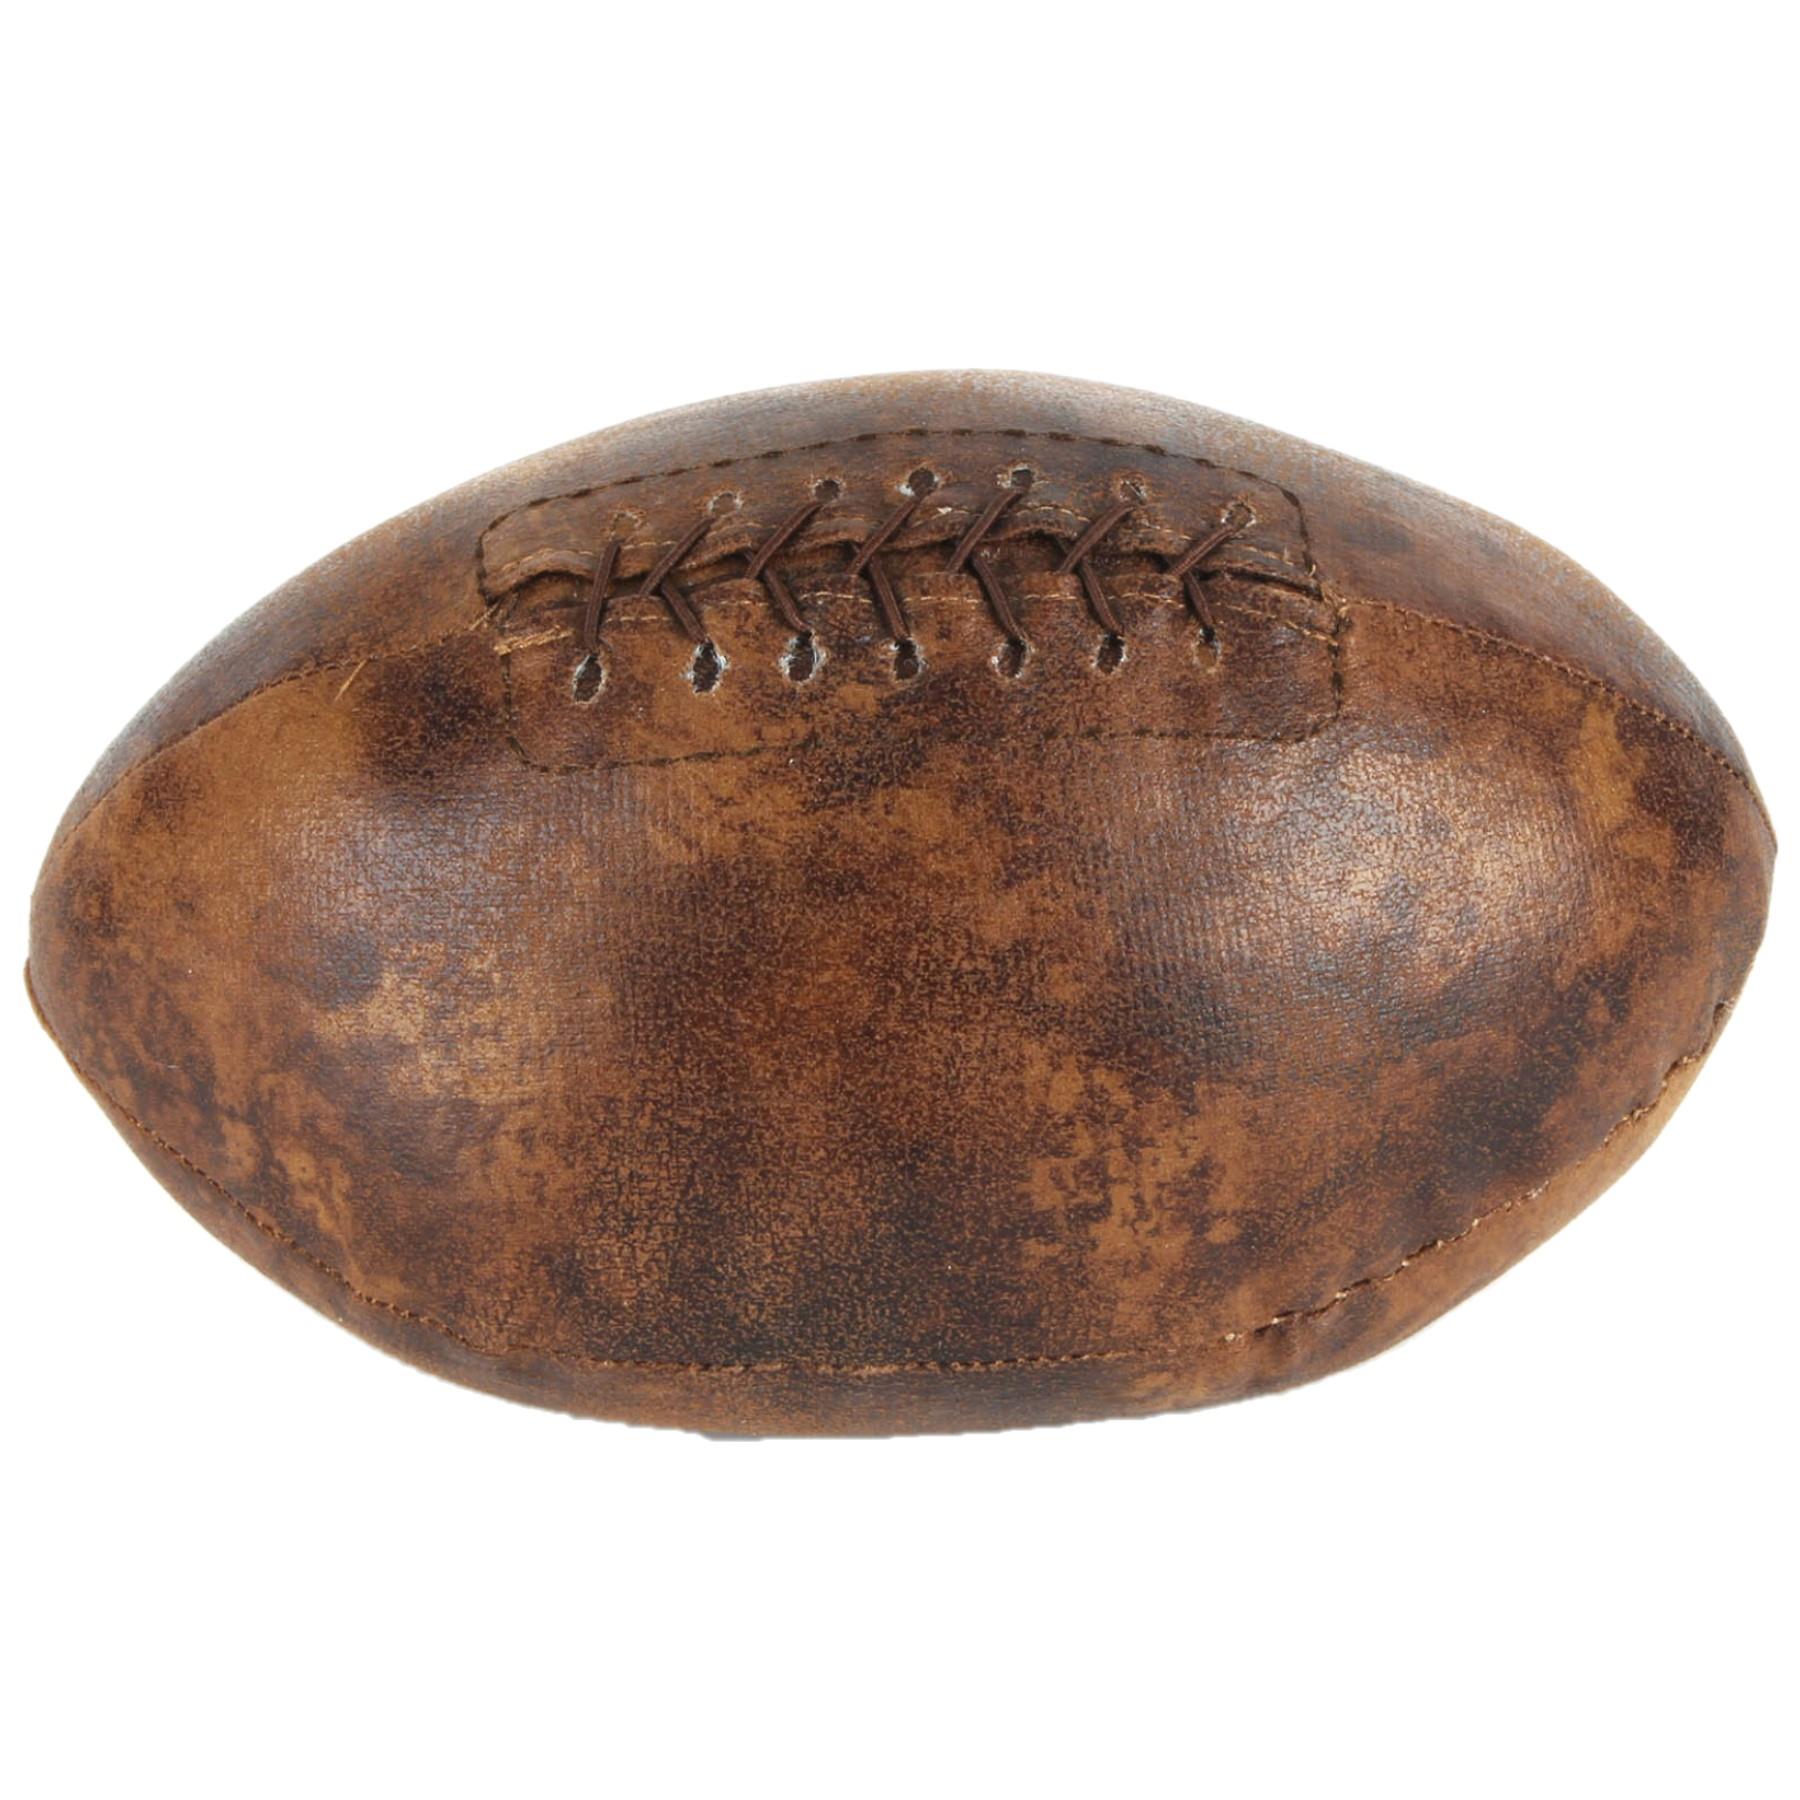 Faux Leather Door Stop Decoration Ornament - Rugby Ball